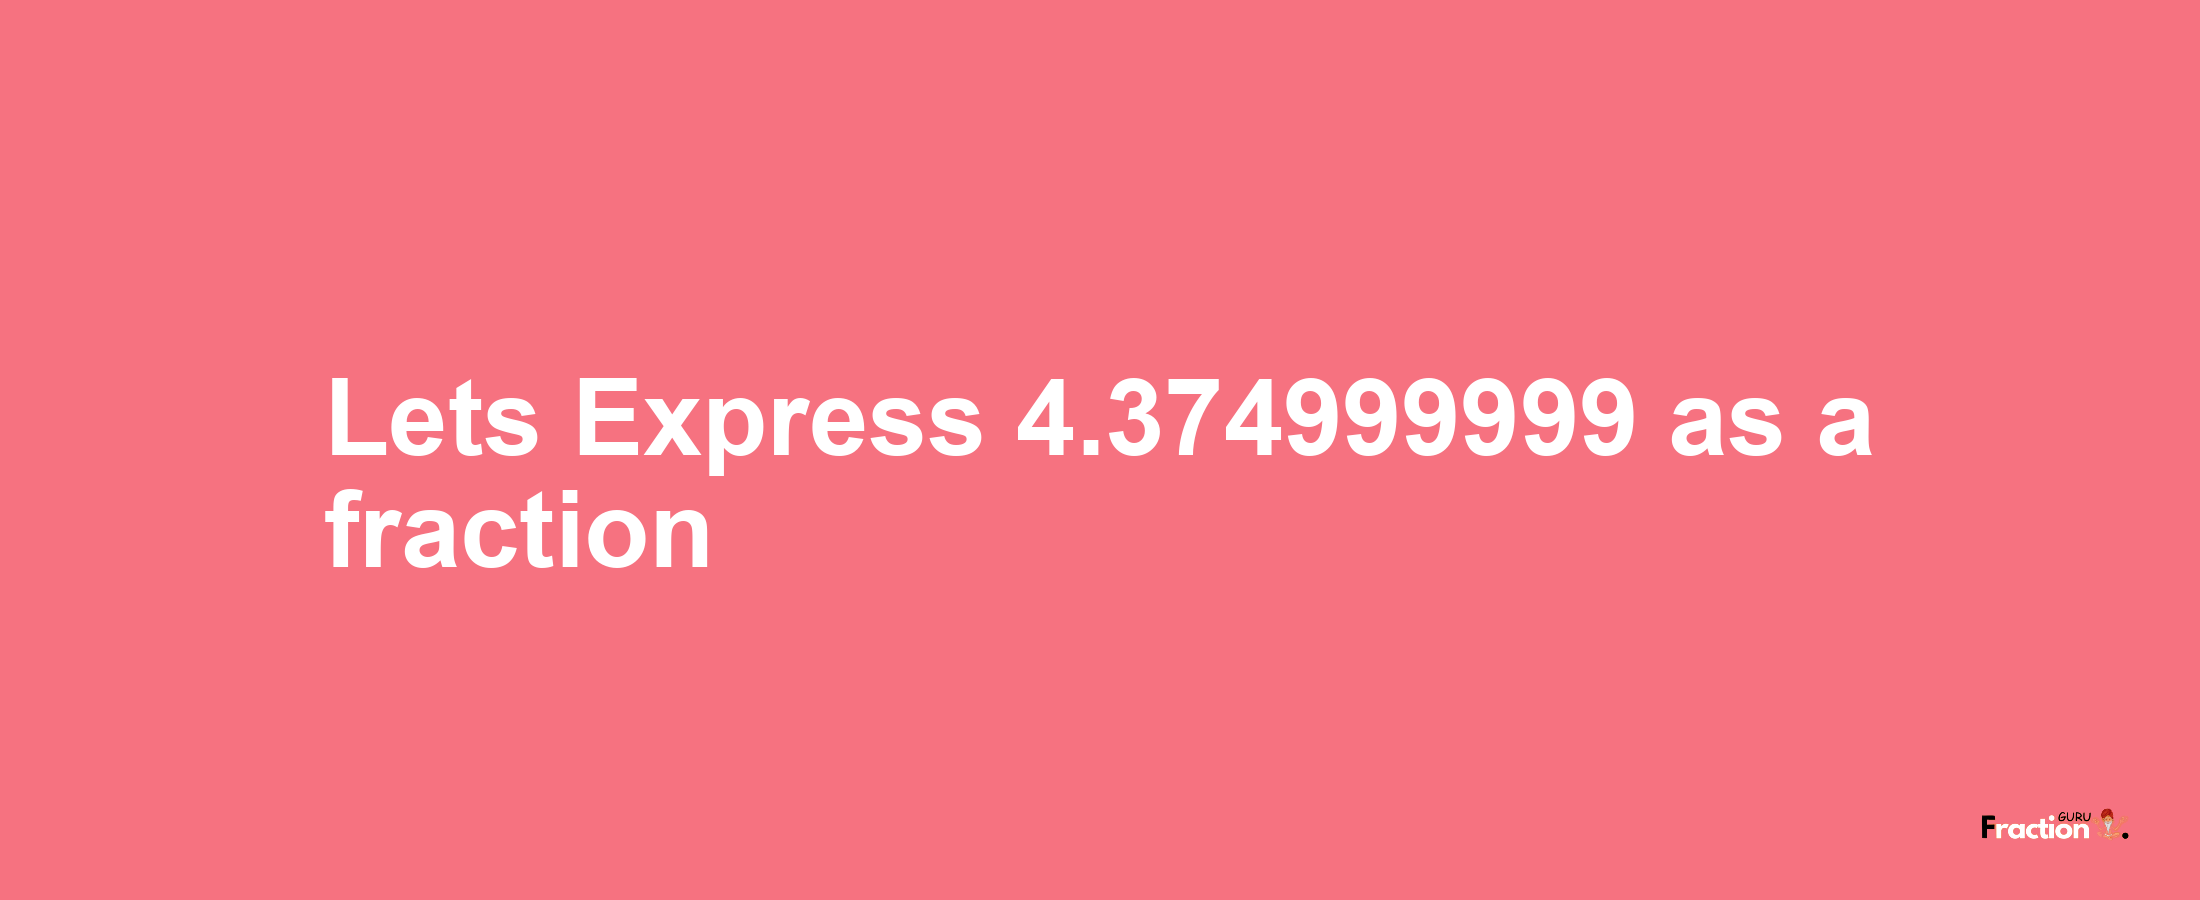 Lets Express 4.374999999 as afraction